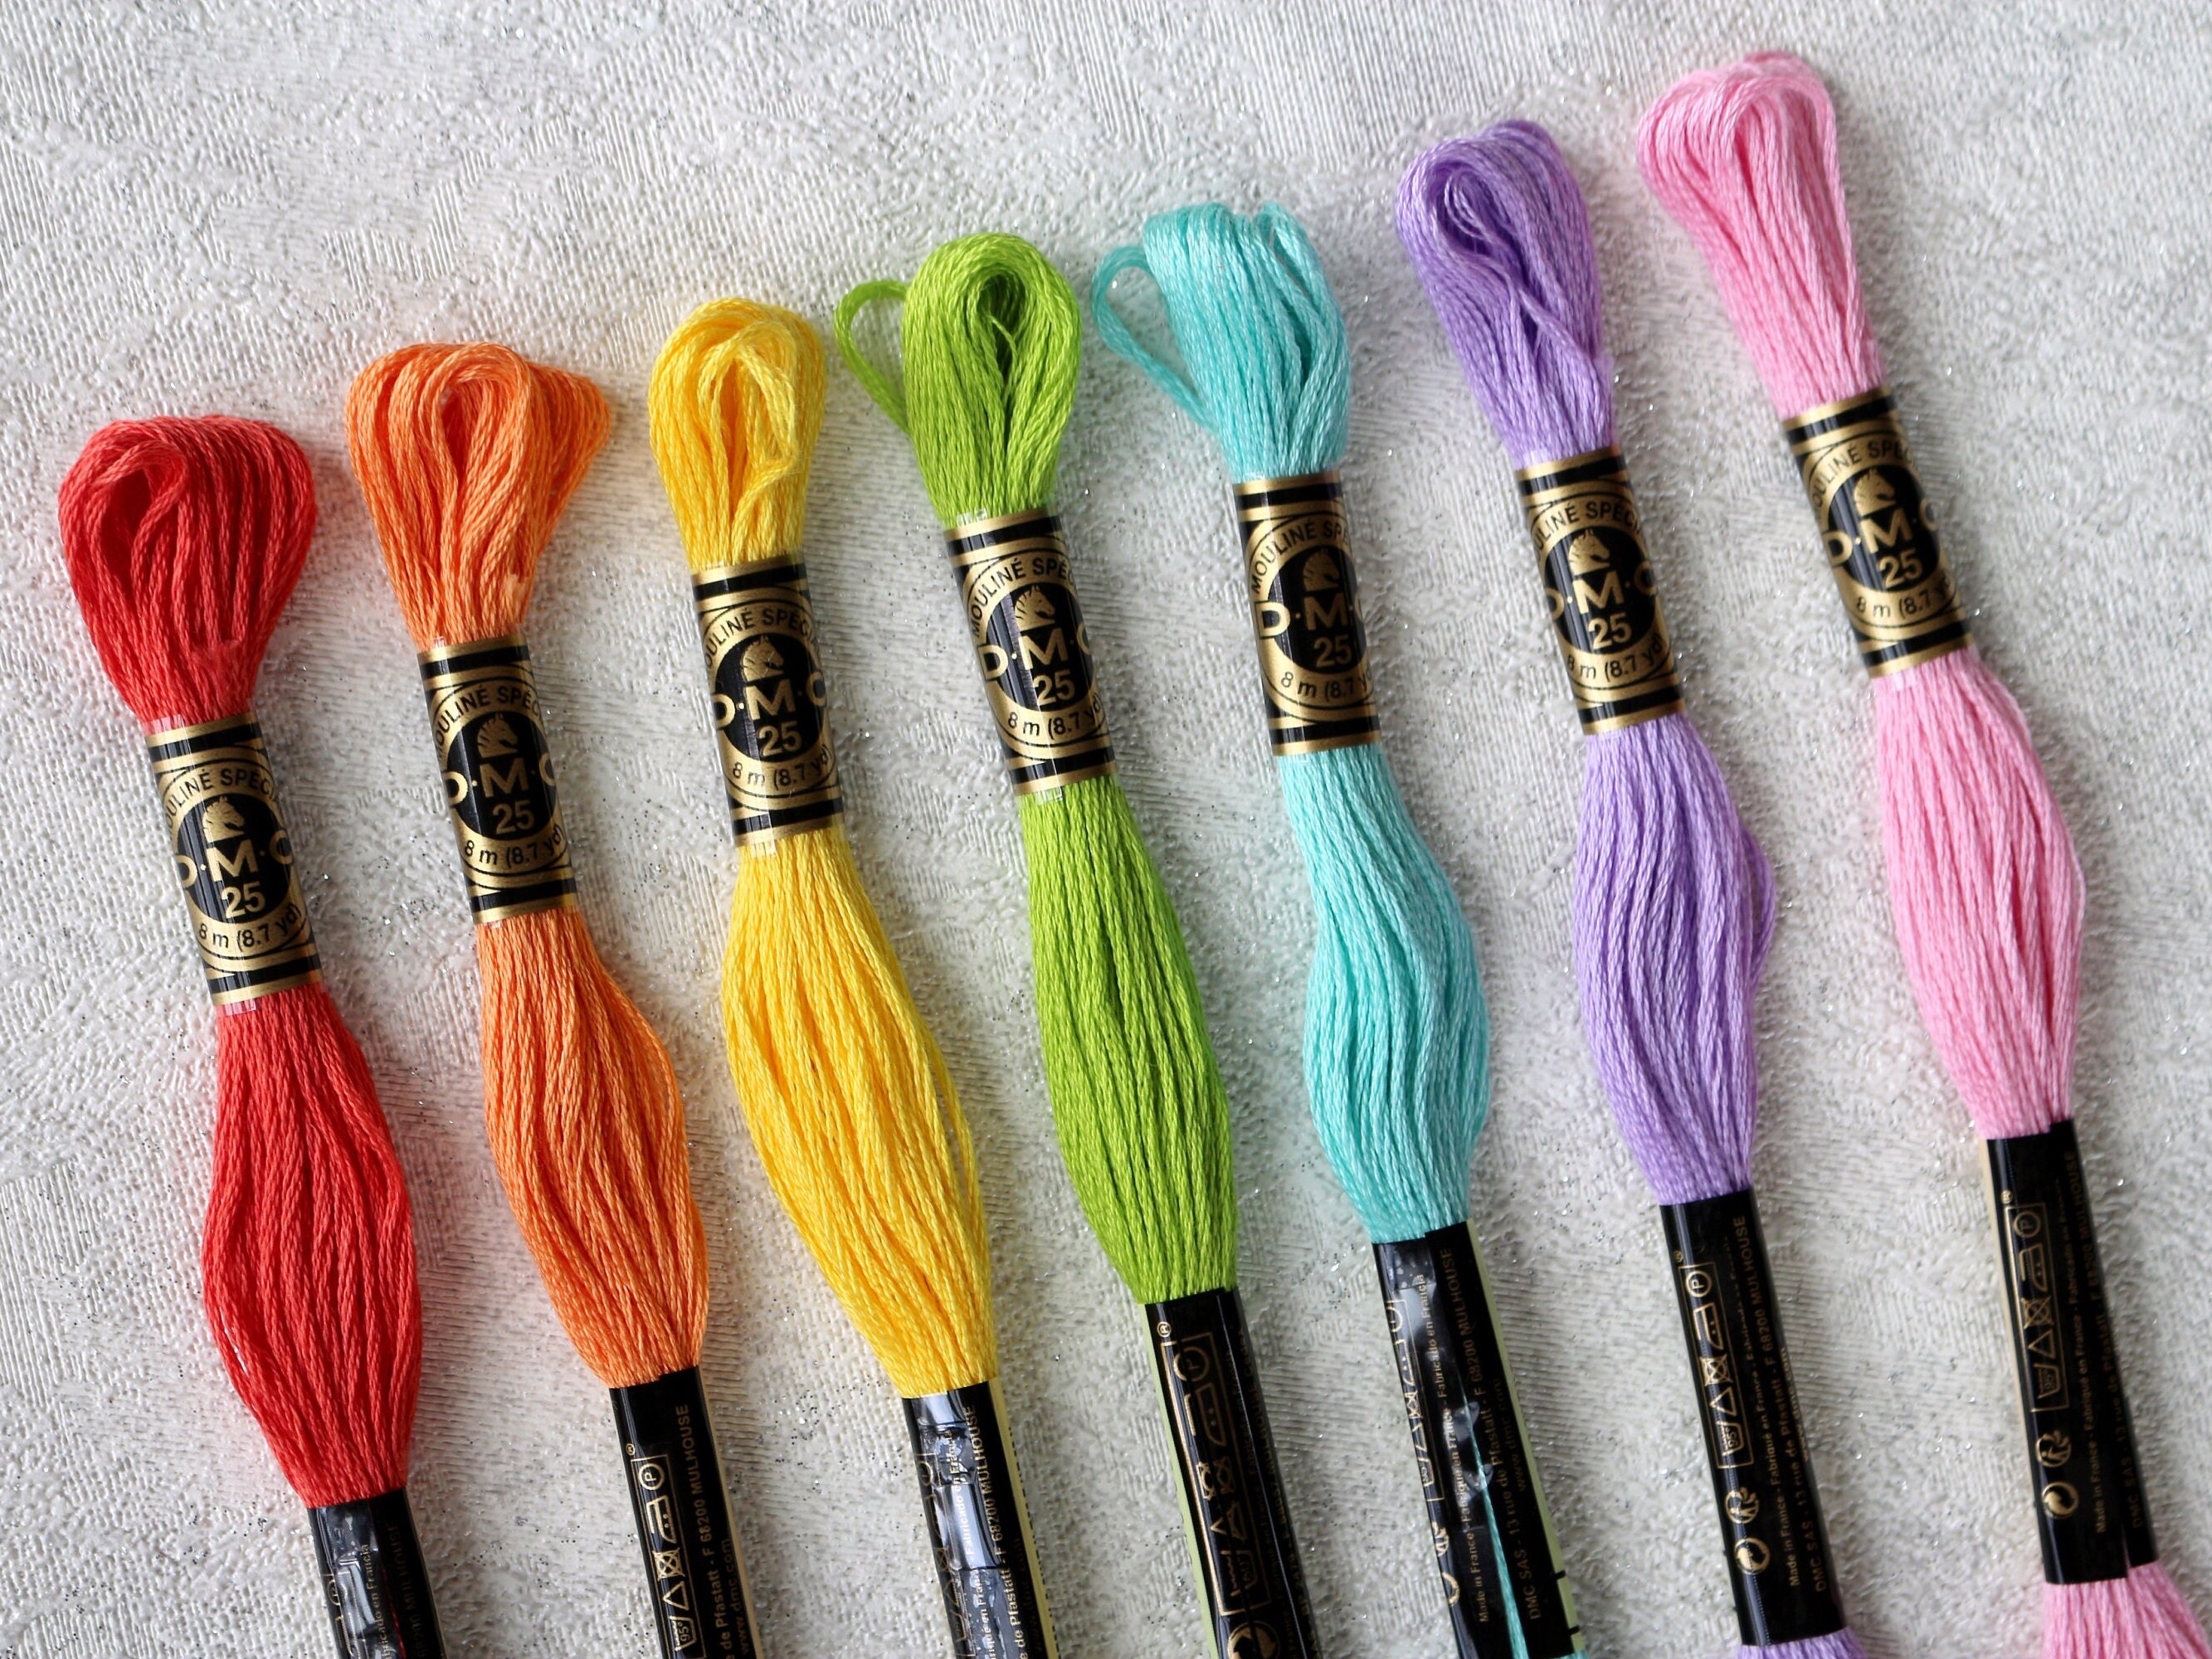 DMC Embroidery Floss, DMC Embroidery Thread Pack,Exclusive Colors,Kit  Bundle with Cross Stitch Hand Embroidery Needles Size 24.Premium Supplies  for